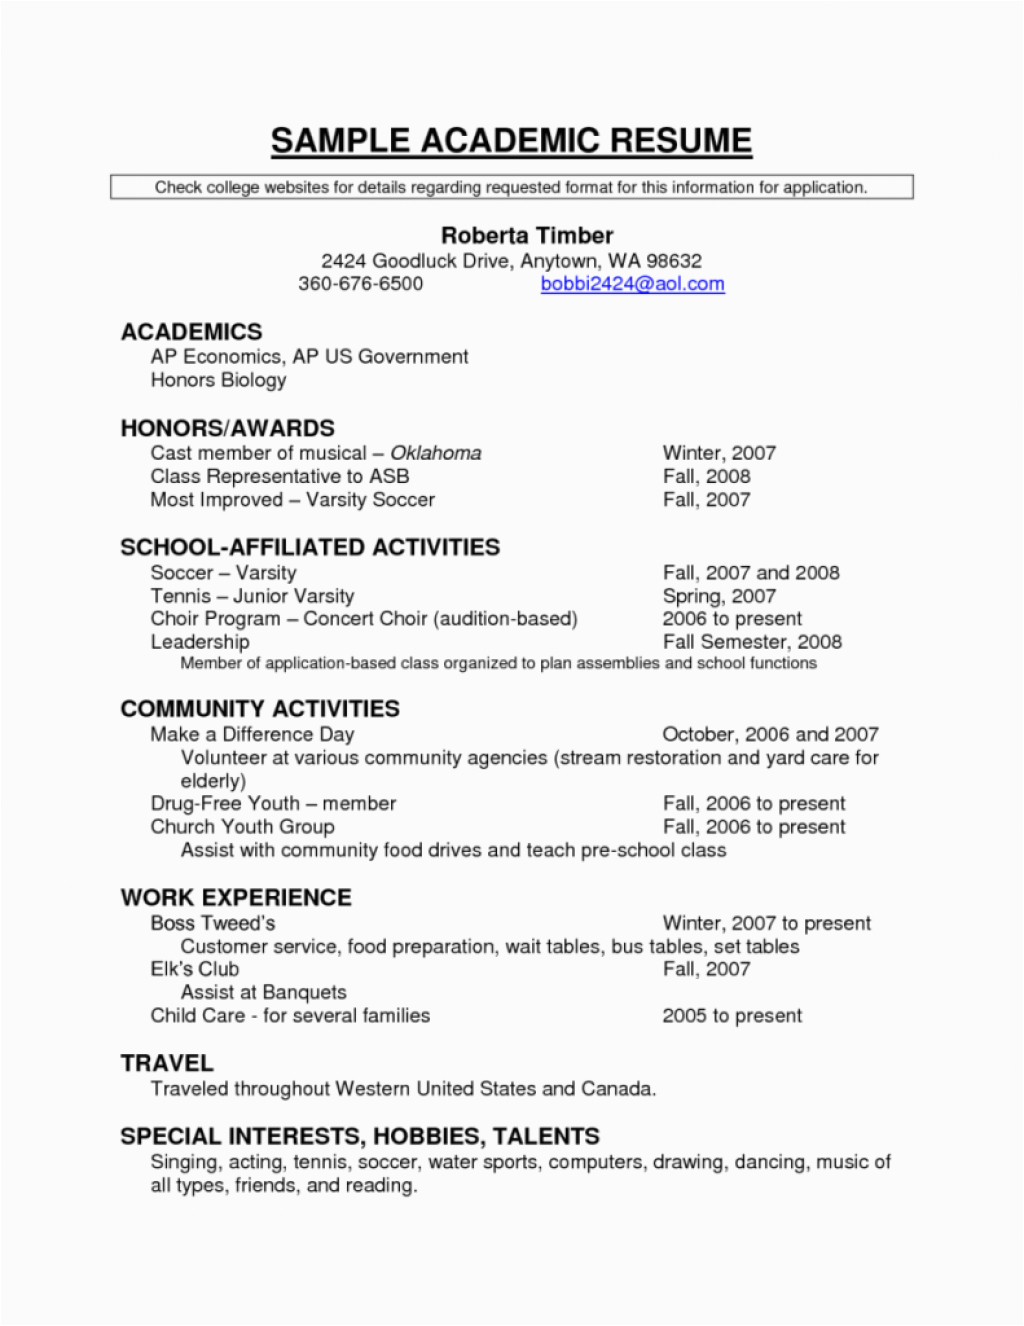 Sample Resume with Awards and Accomplishments 8 Beautiful Resume Awards Section Example for Example